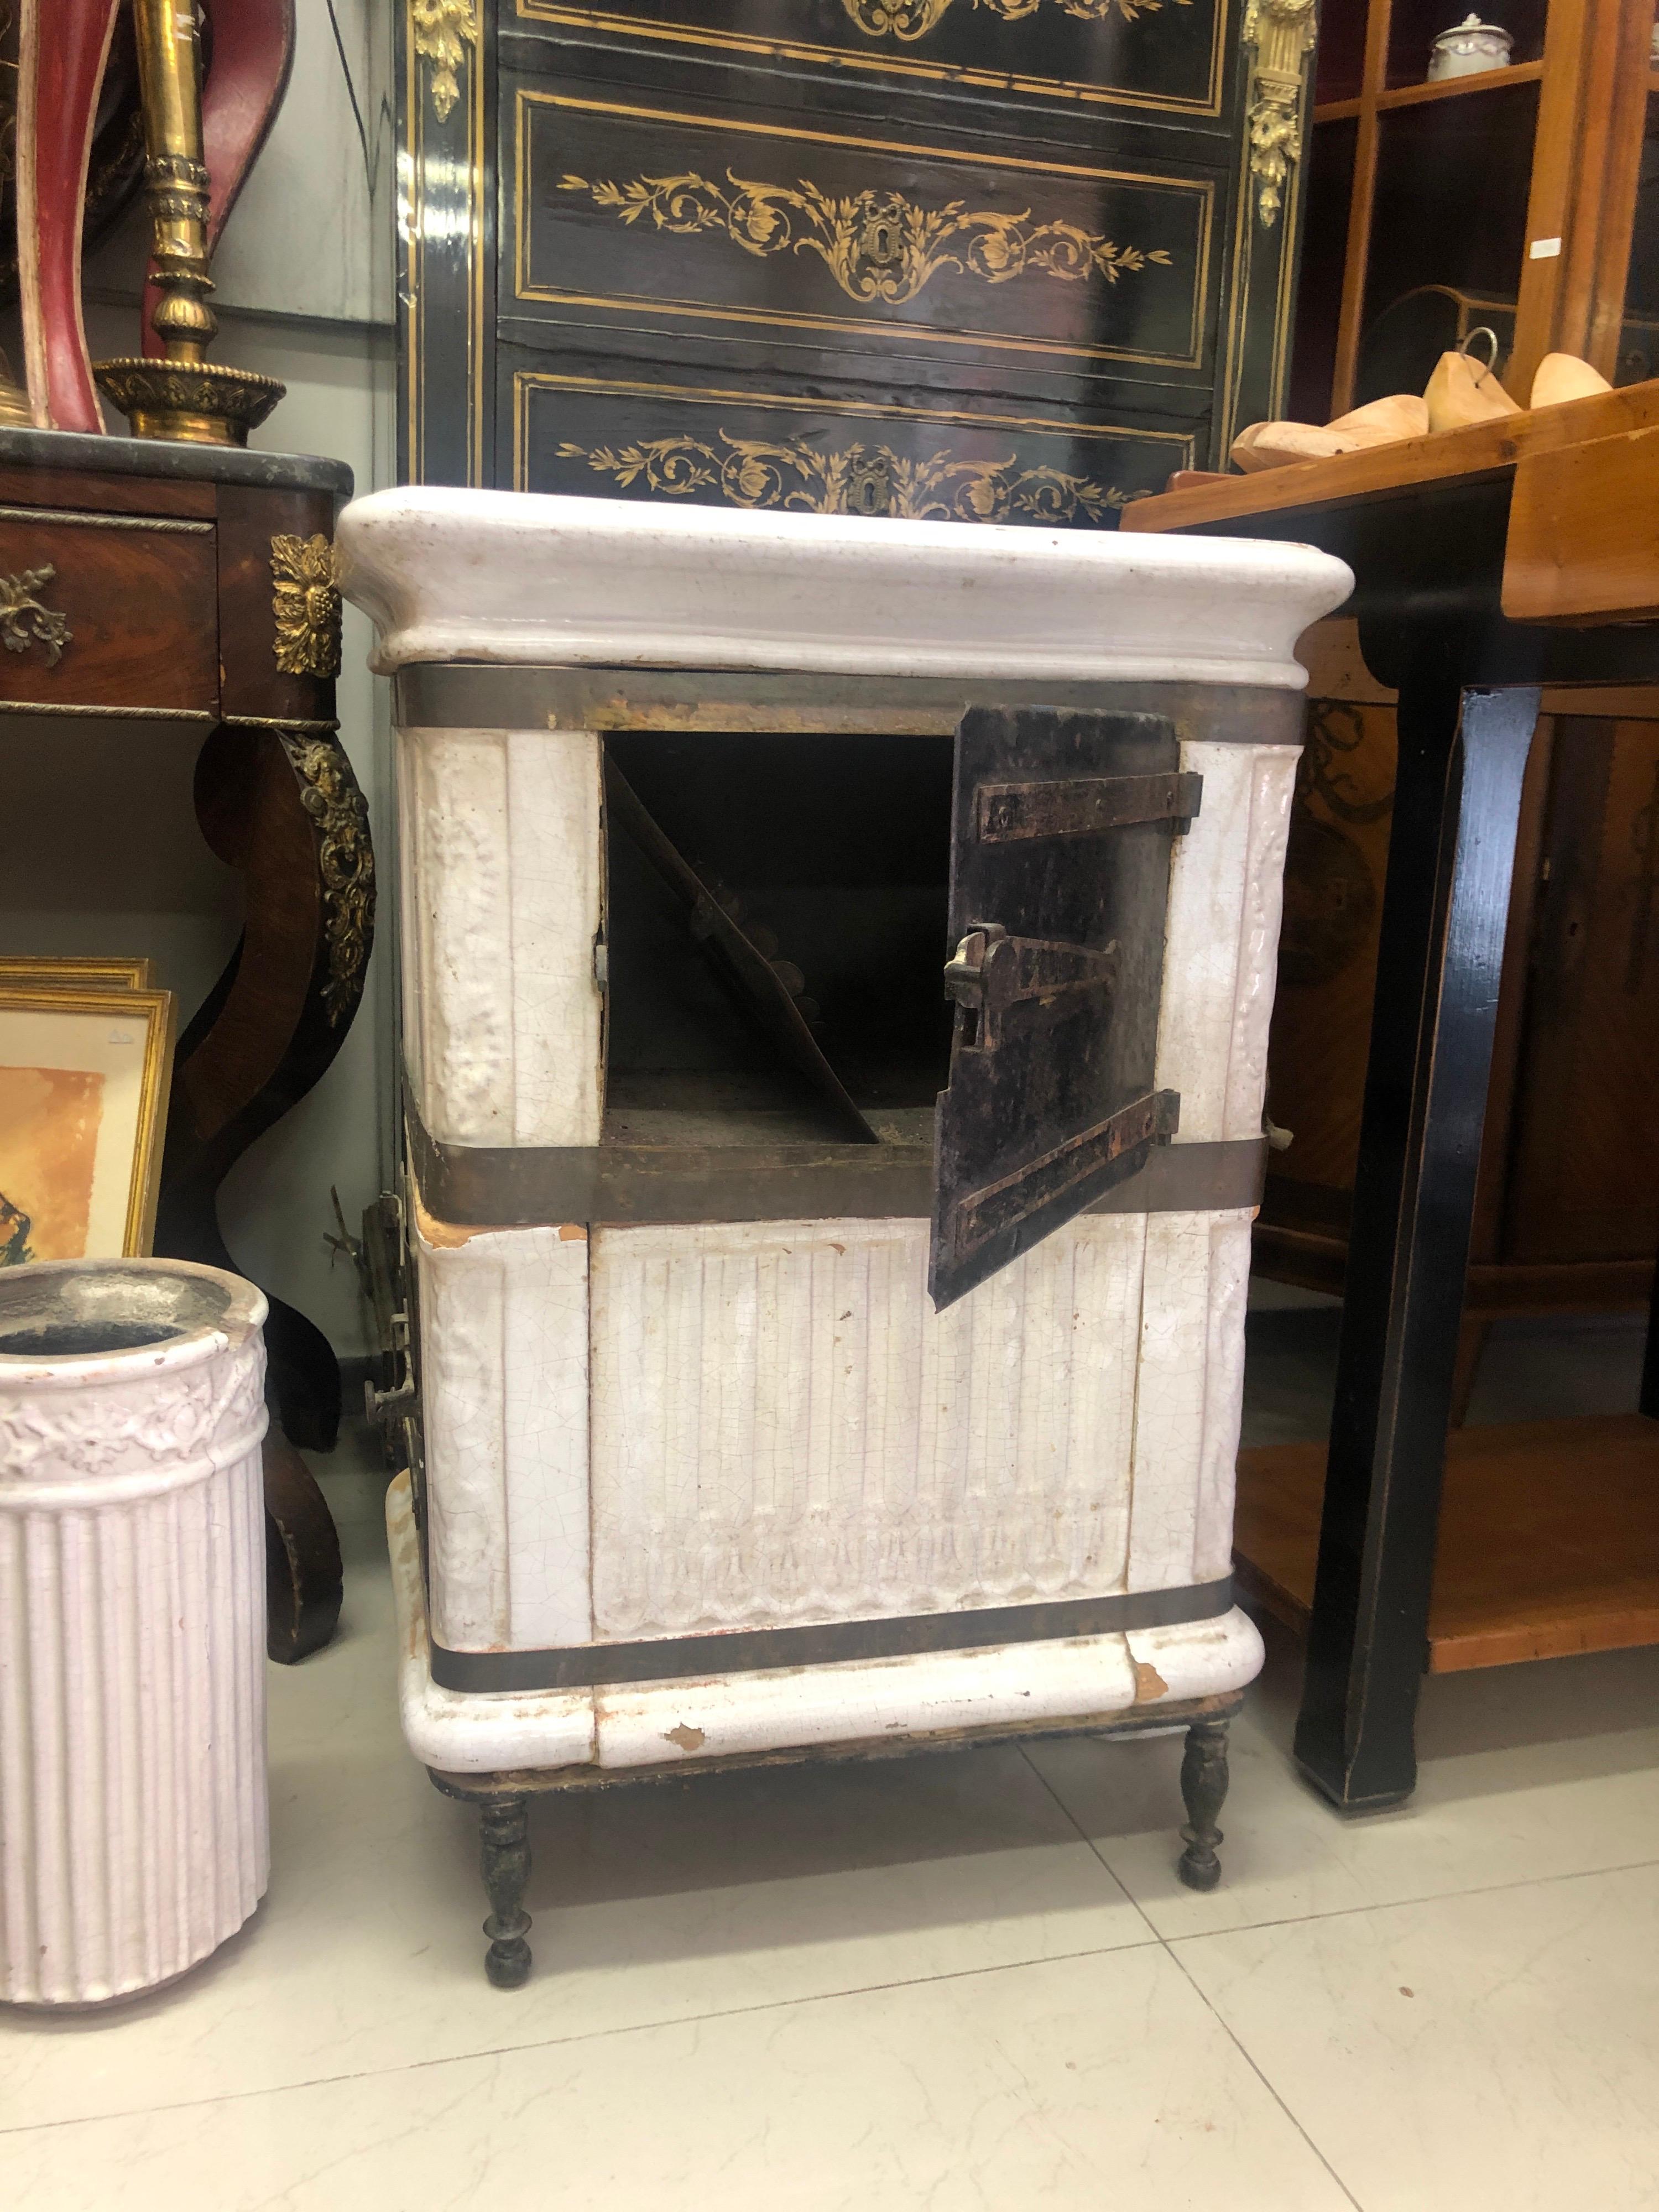 Beautiful white ceramic stove made in France, circa 1880.
The wood to be loaded from side door and heat to be used for cooking or just heating from front door.
The piece is nicely decorated with floral elements.
France, circa 1880.